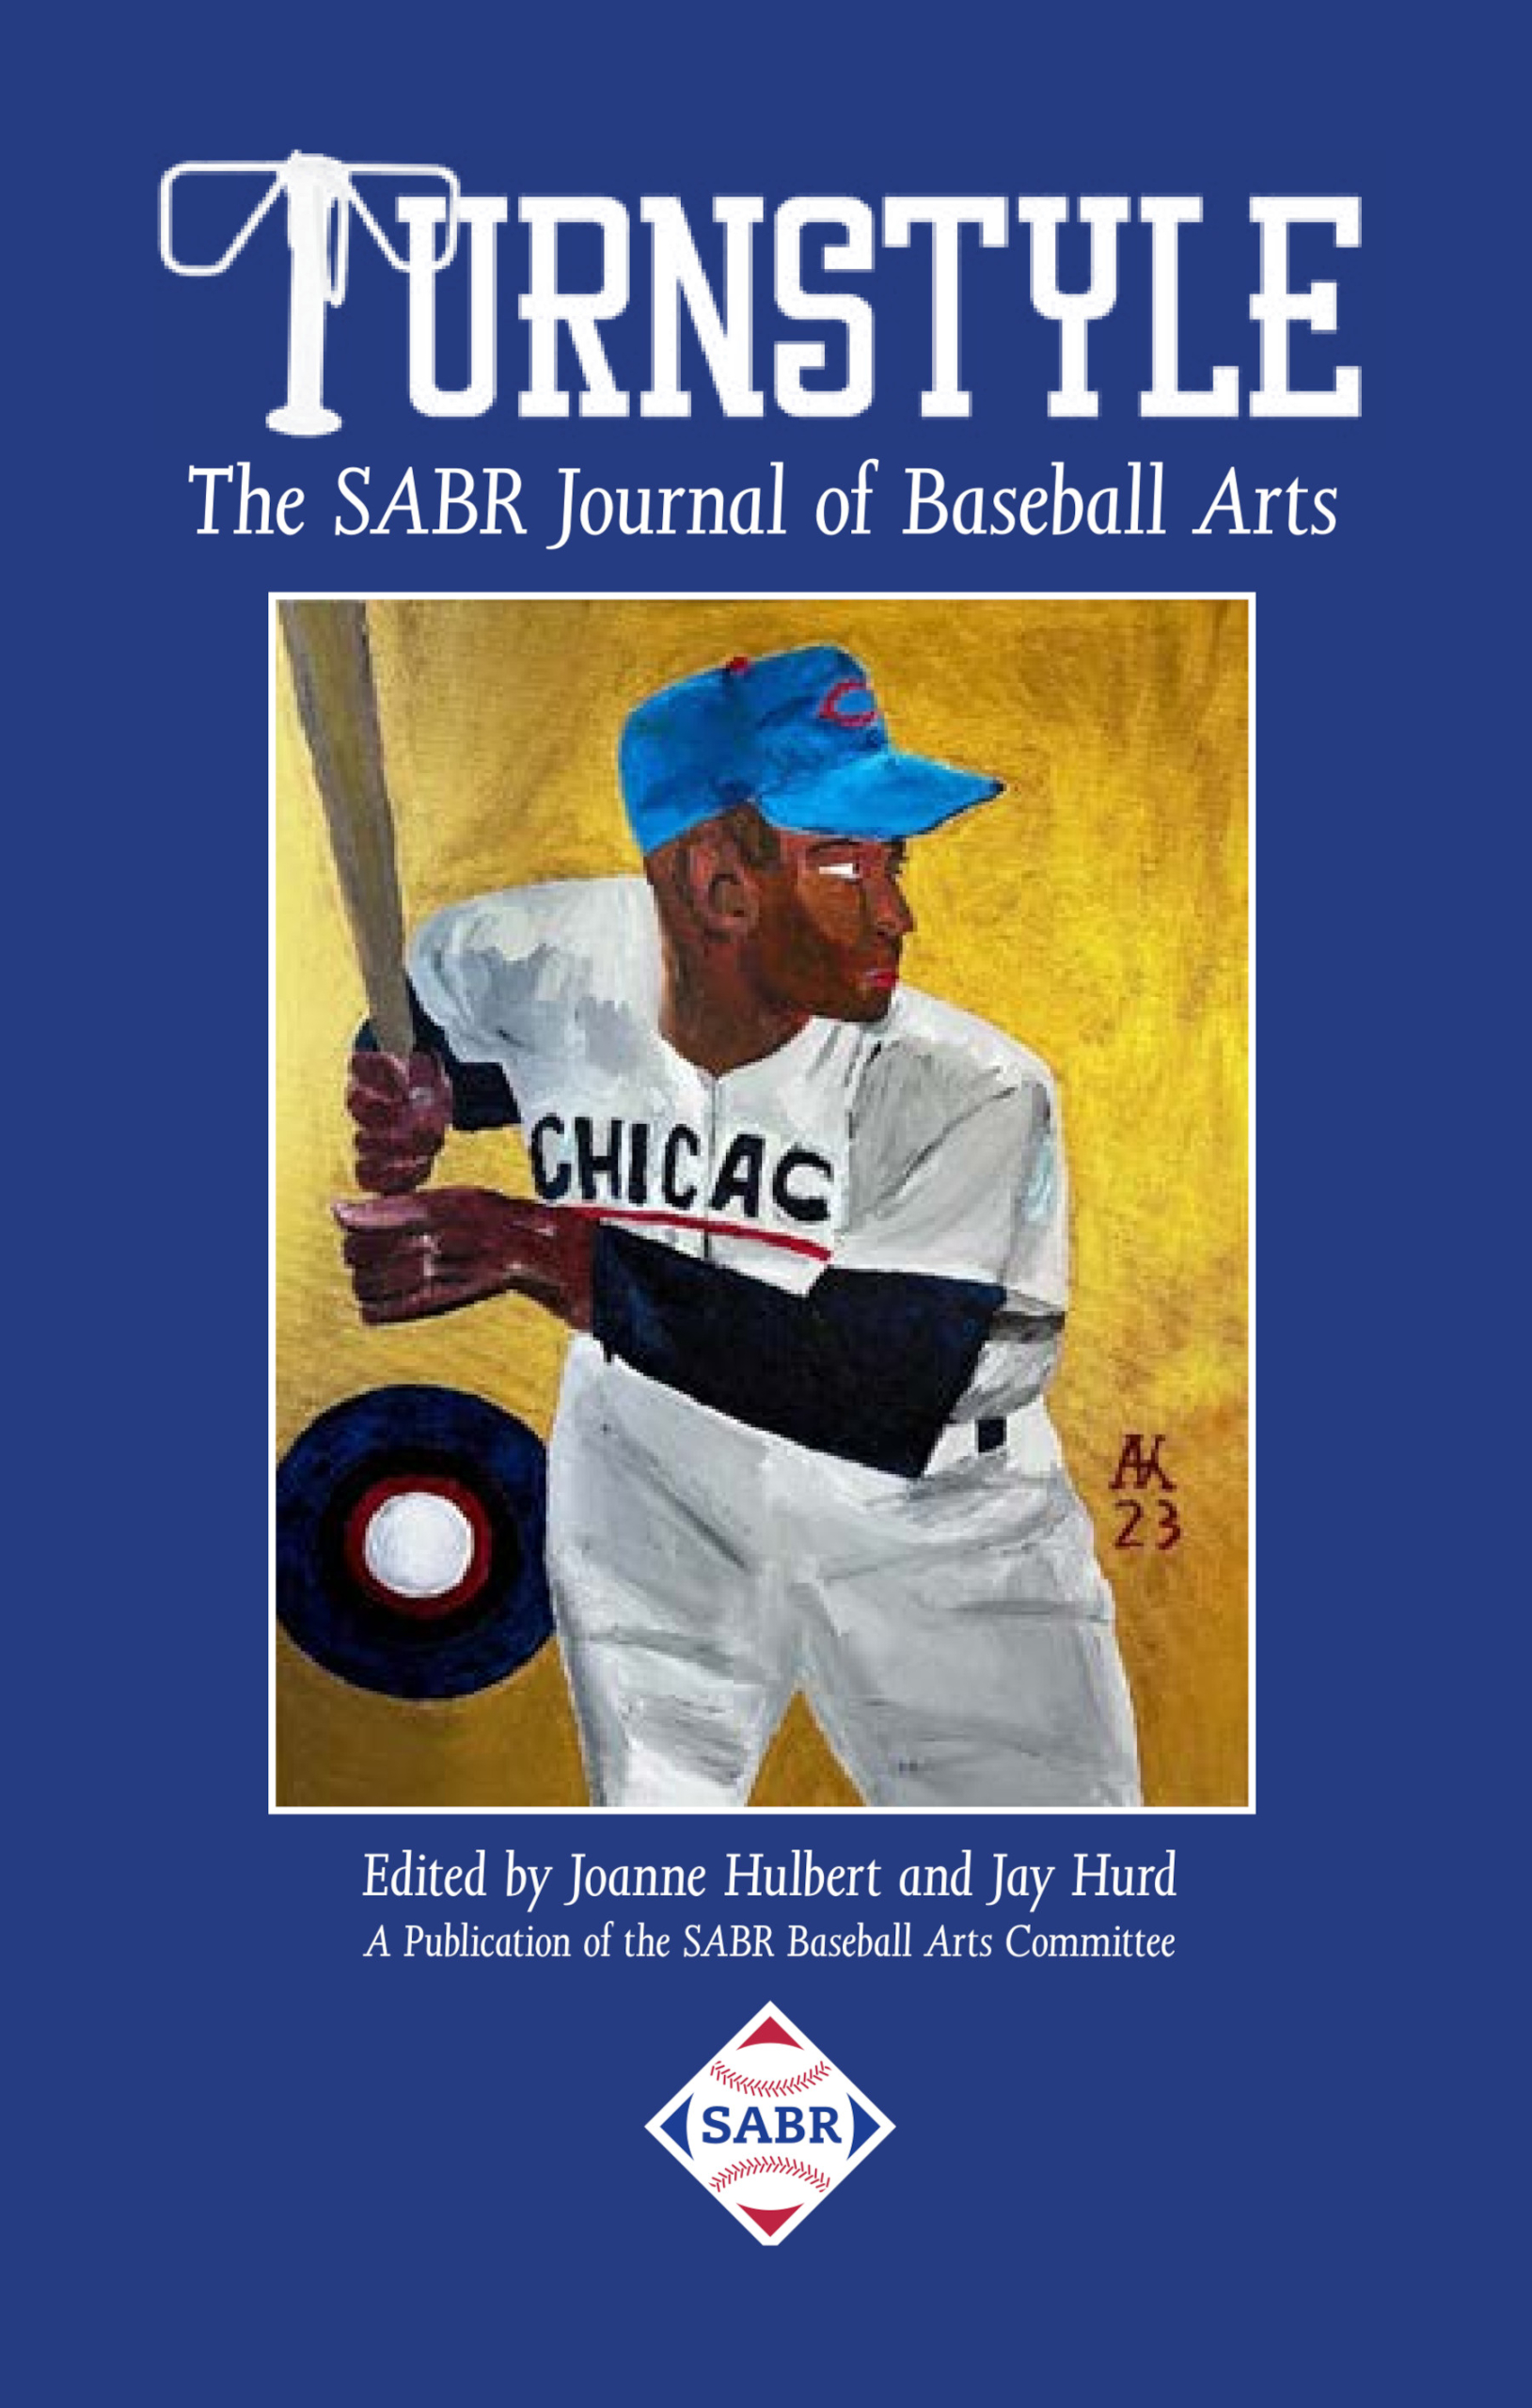 Turnstyle: The SABR Journal of Baseball Arts, Volume 4 (2024), edited by Joanne Hulbert and Jay Hurd